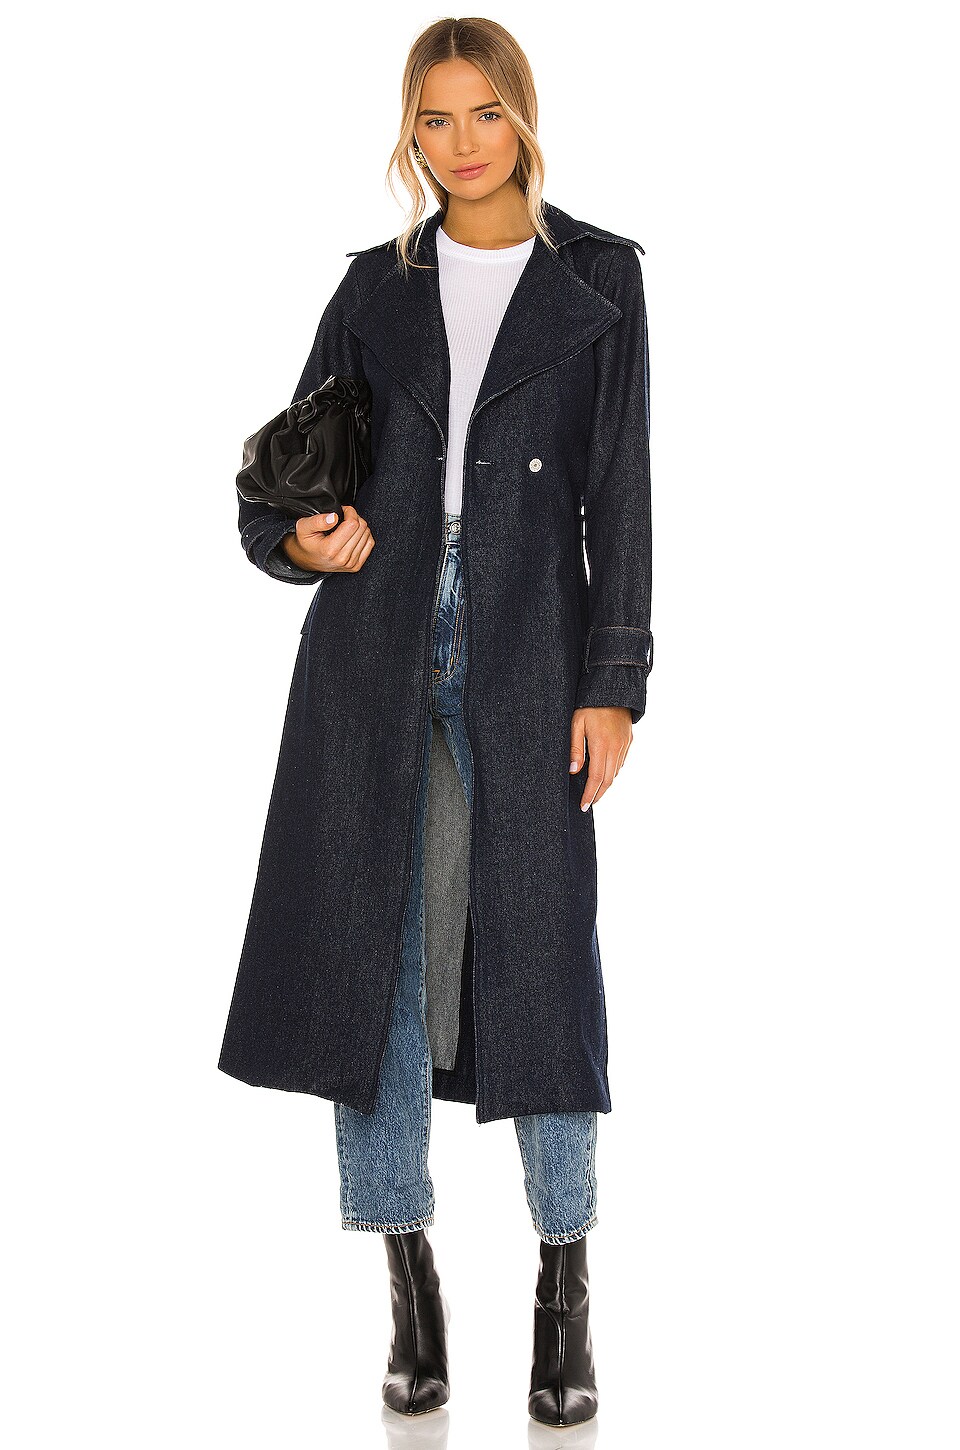 TRAVE Angelina Double Breasted Trench Coat in Venuss | REVOLVE